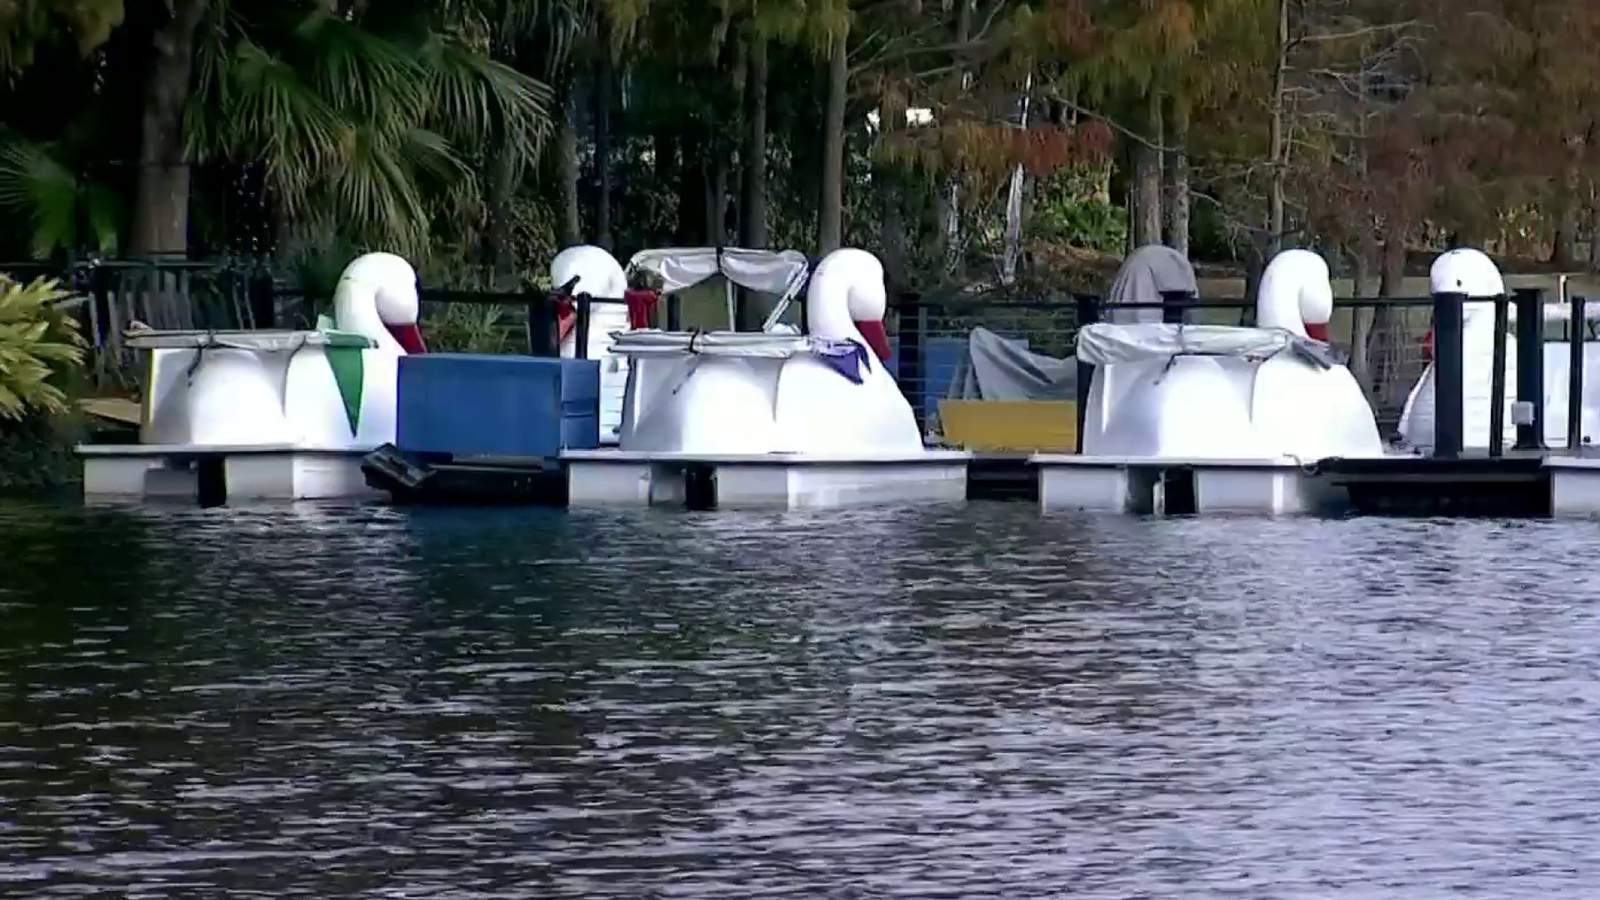 Use of swan boats temporarily halted on Lake Eola due to elevated bacteria levels